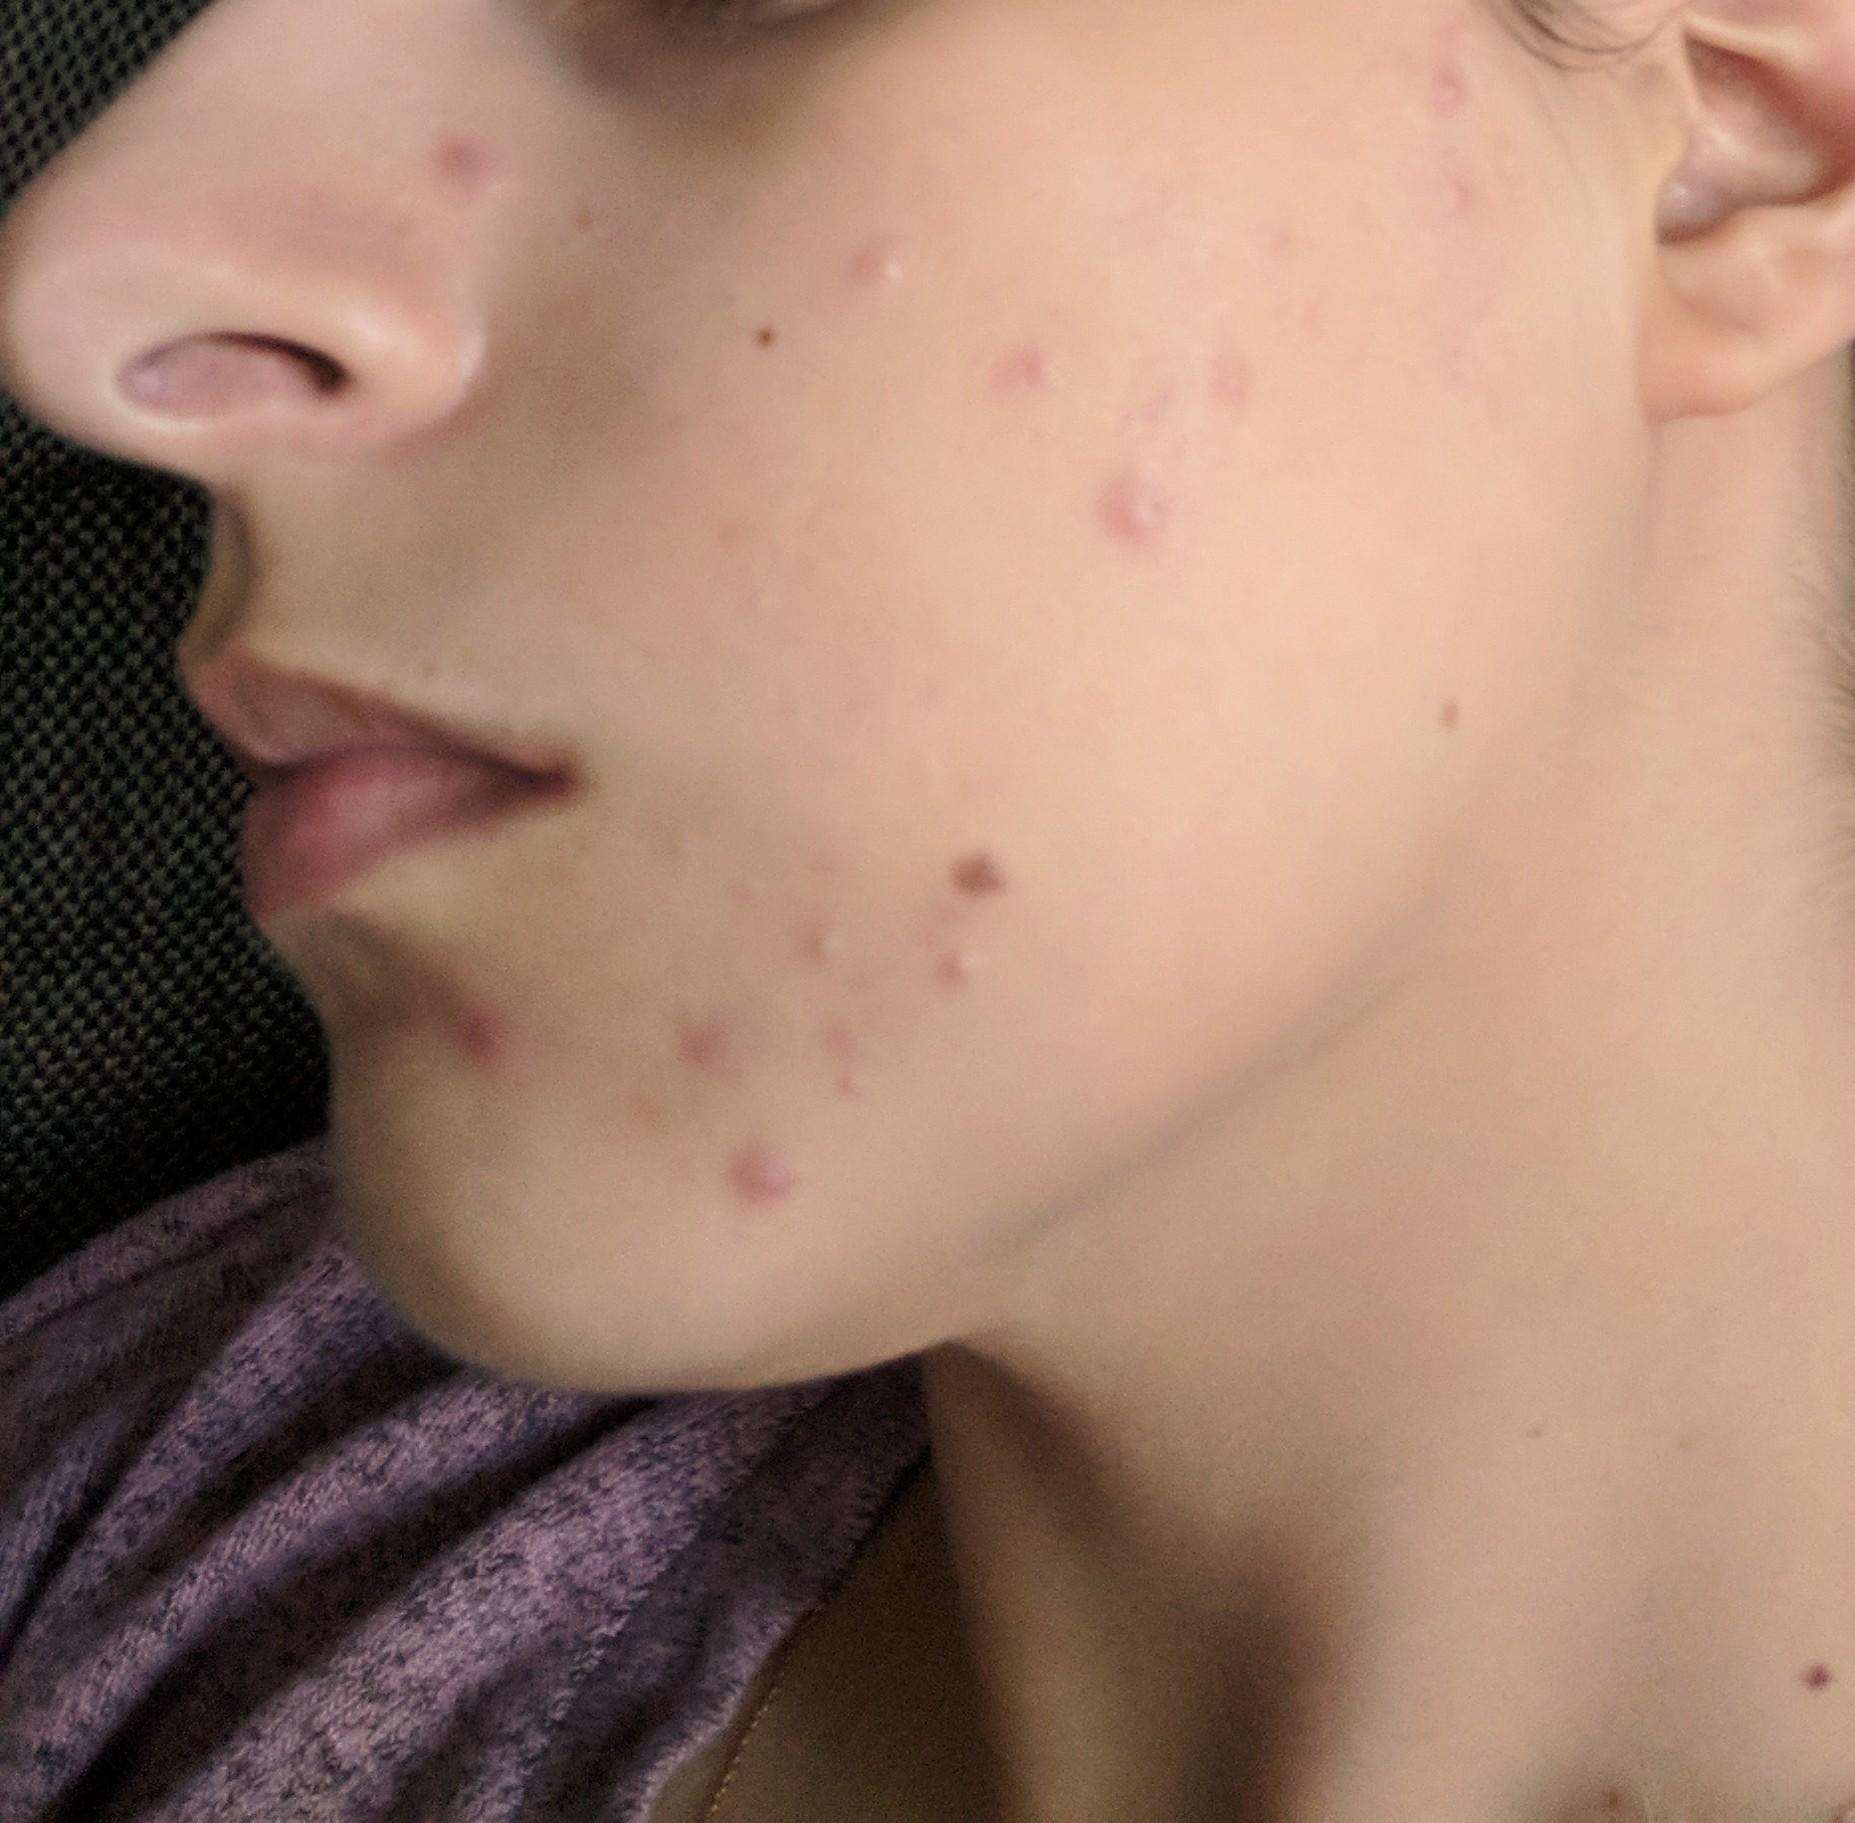 Please help. Dropping Proactiv+ and looking for advice on hormonal acne ...